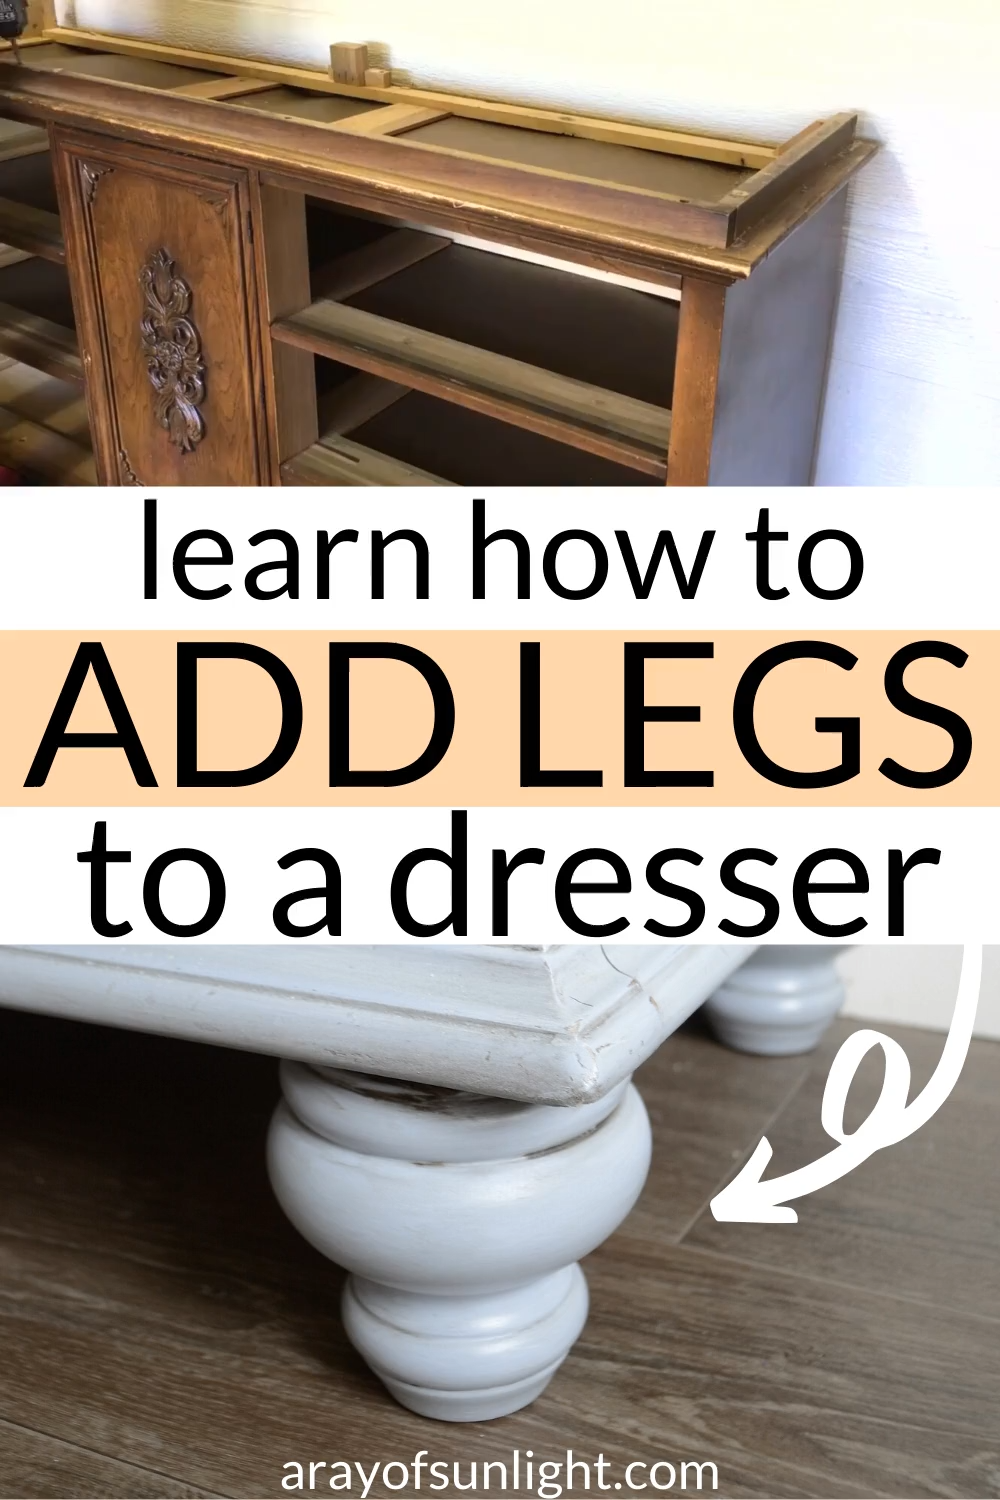 The Best Way to Add Legs to a Dresser - The Best Way to Add Legs to a Dresser -   18 diy projects for the home furniture ideas